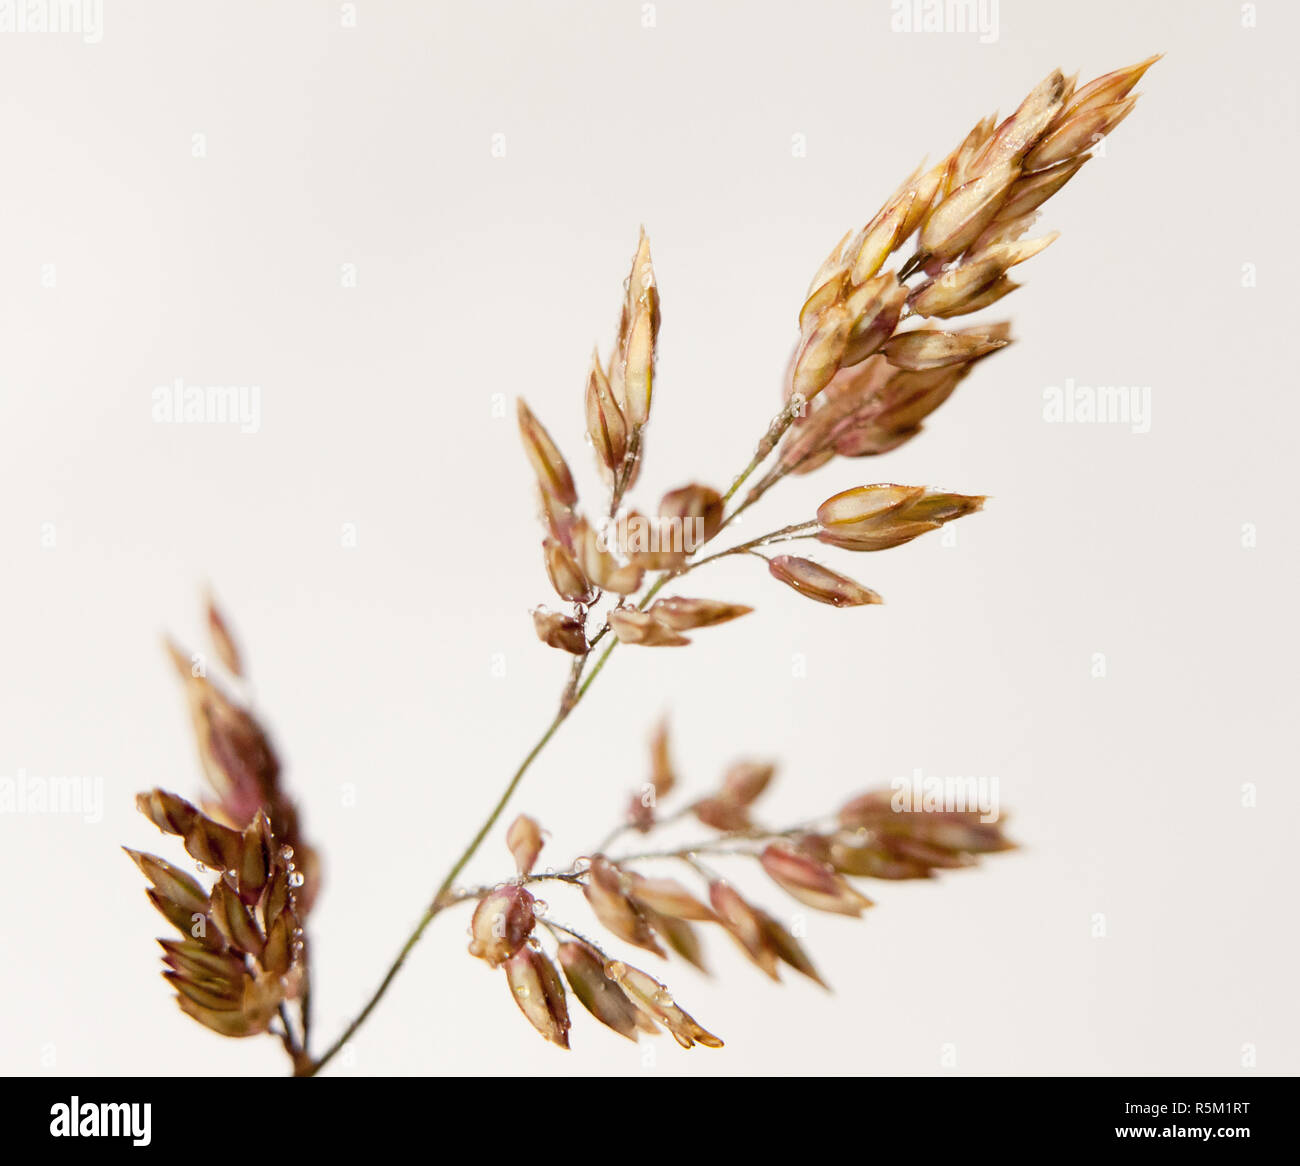 golden grass leaf close up detail water dew droplets white background Stock Photo